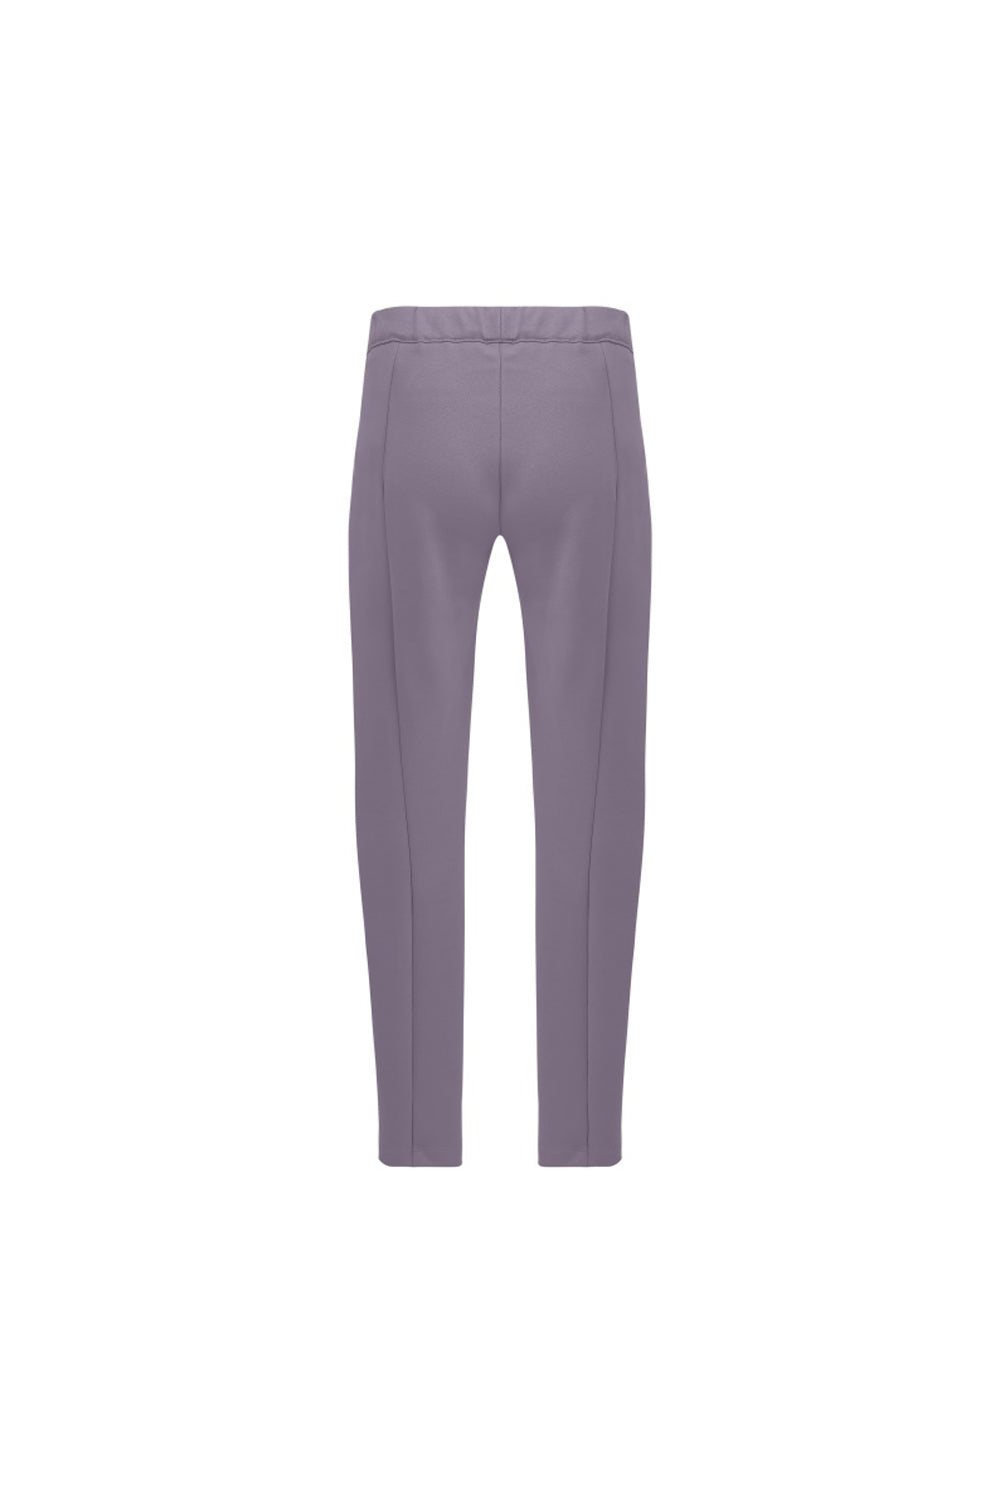 Frankie Leather Jogger Pant - Lilac